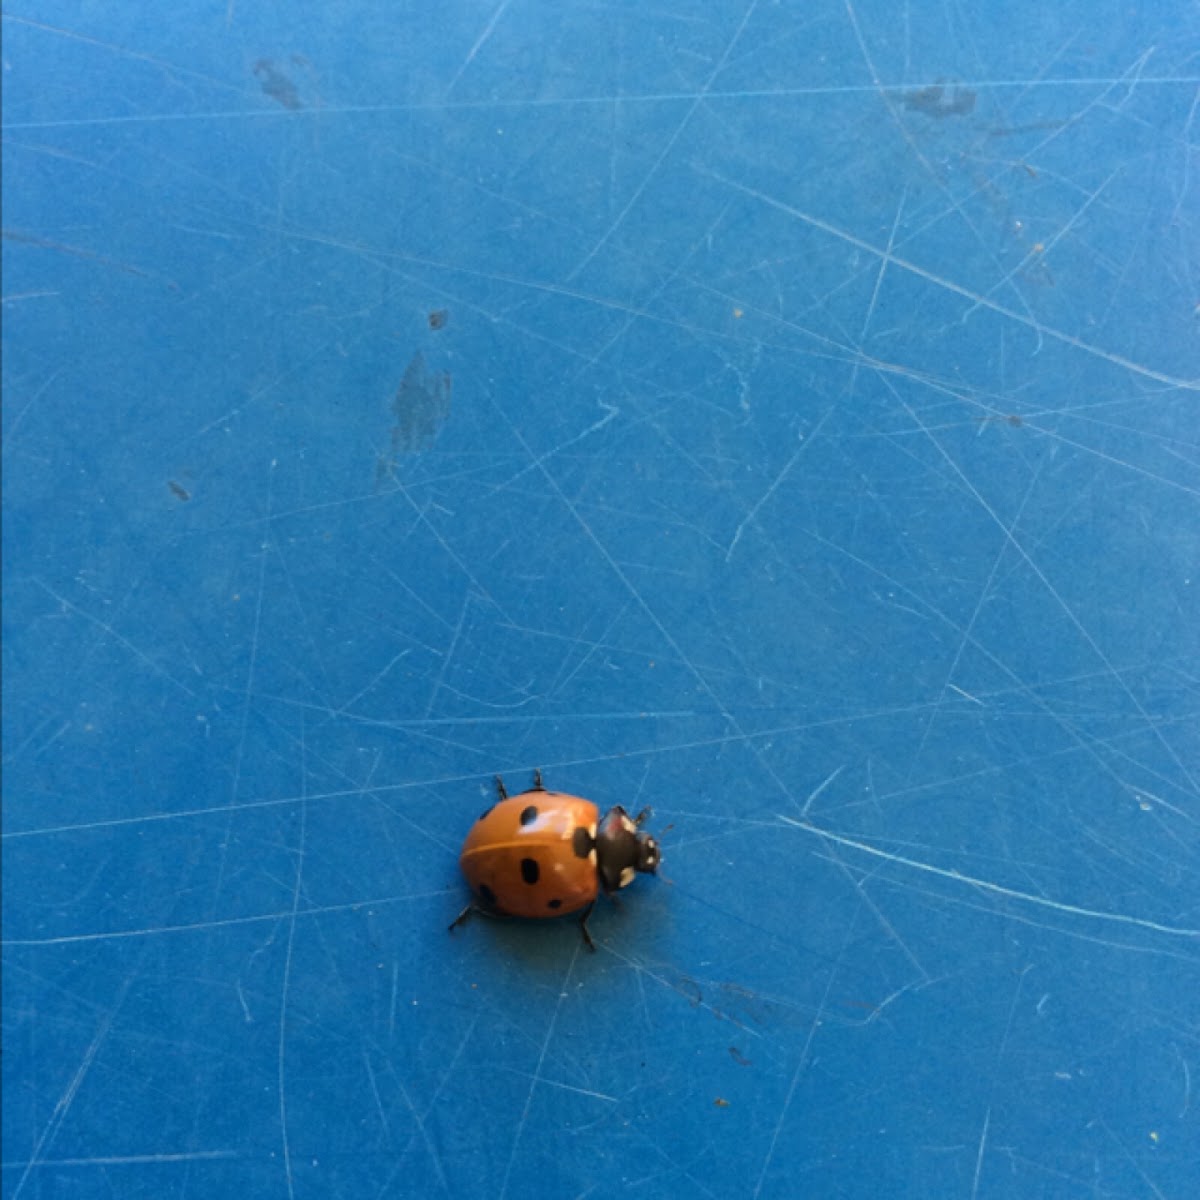 Seven Spotted Ladybird